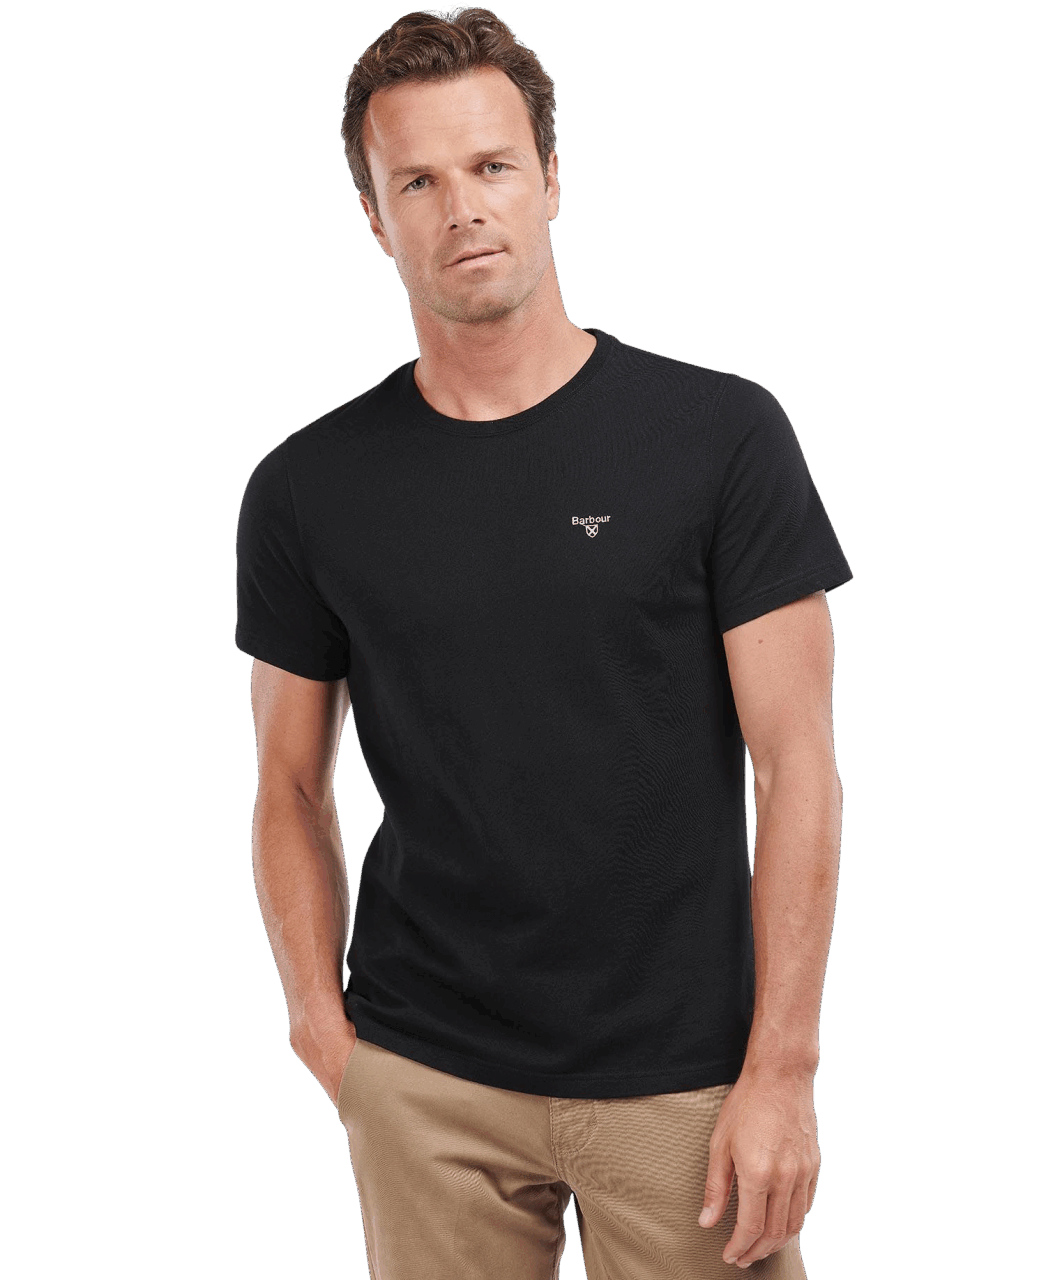 Barbour Sports Tee - black